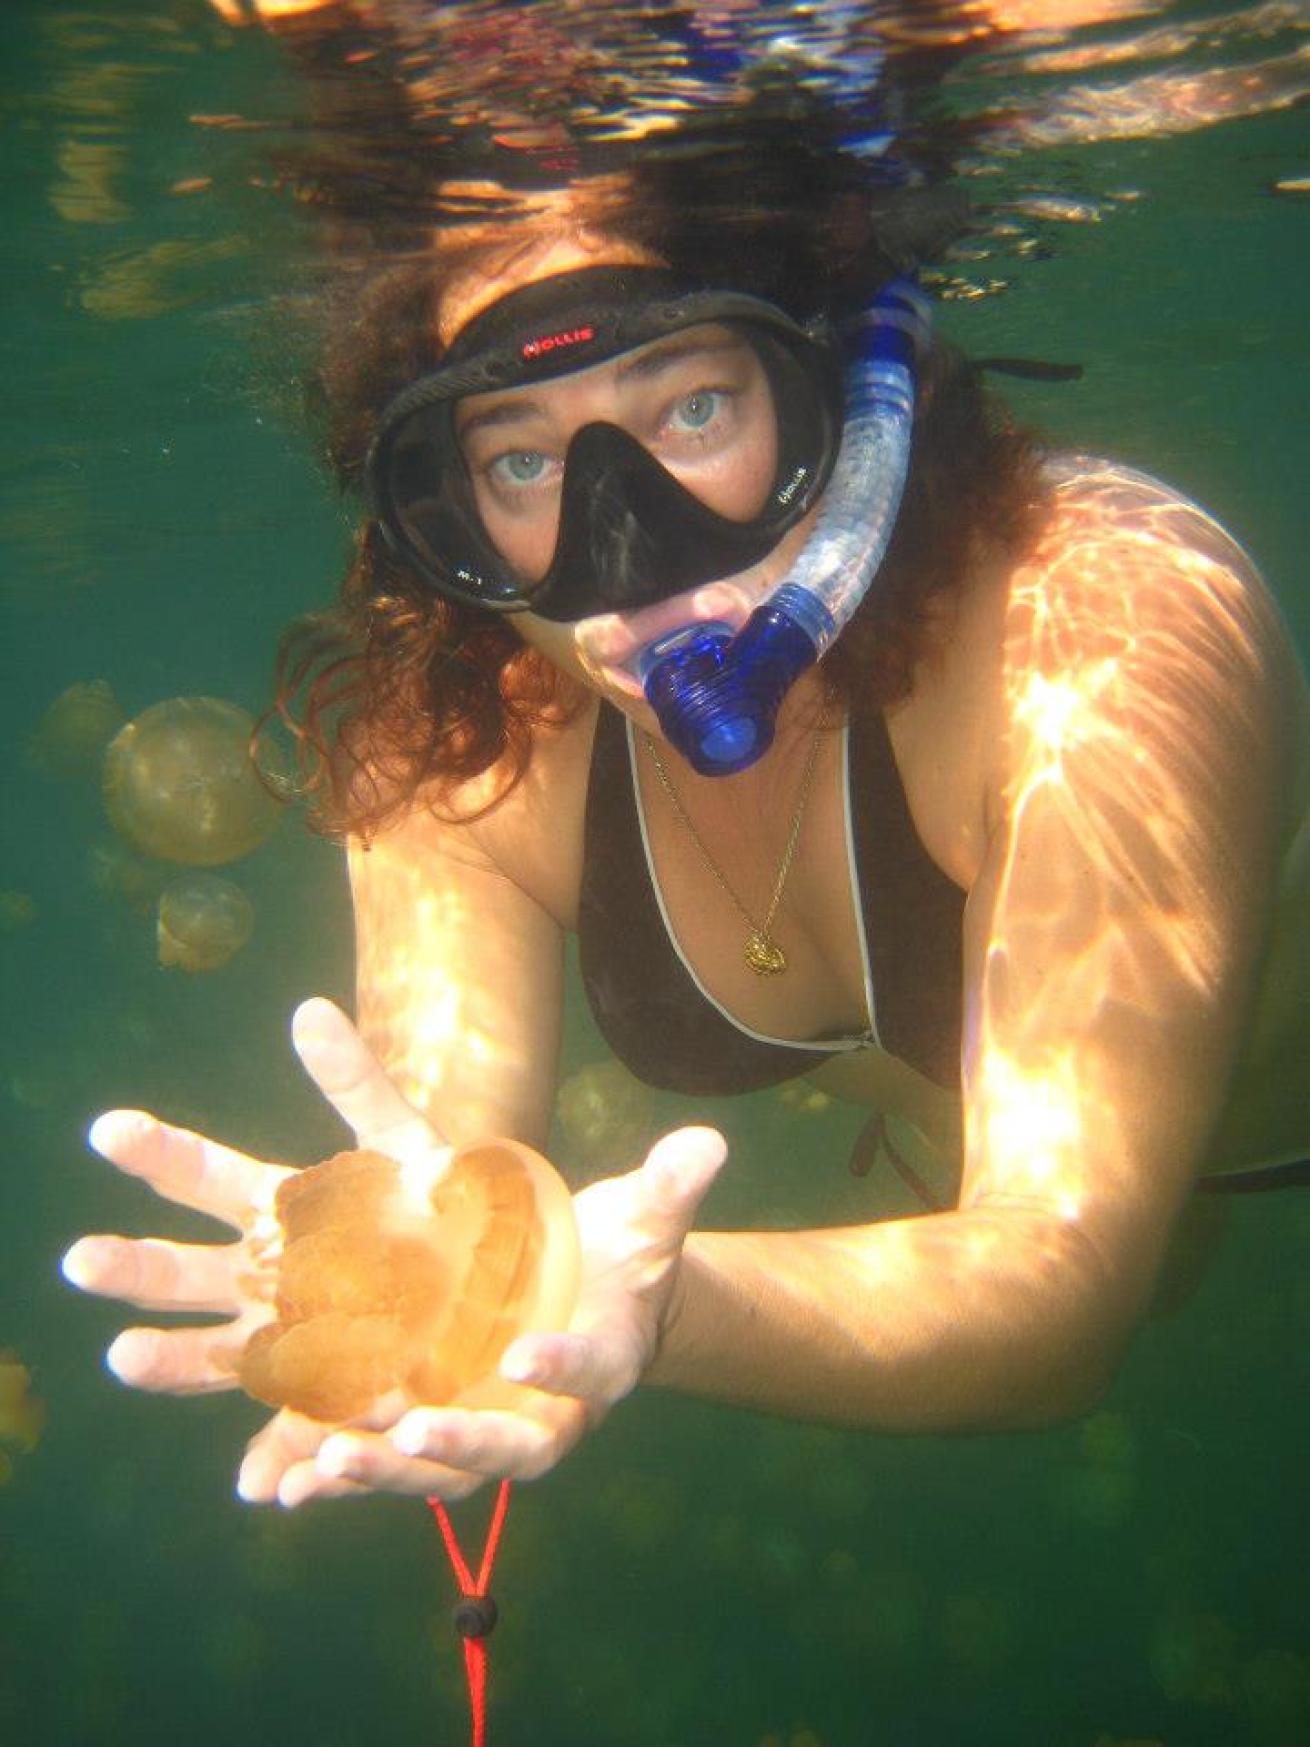 Autumn Blum cradles a golden jellyfish in Palau during the trip that inspired her to create Stream2Sea. 